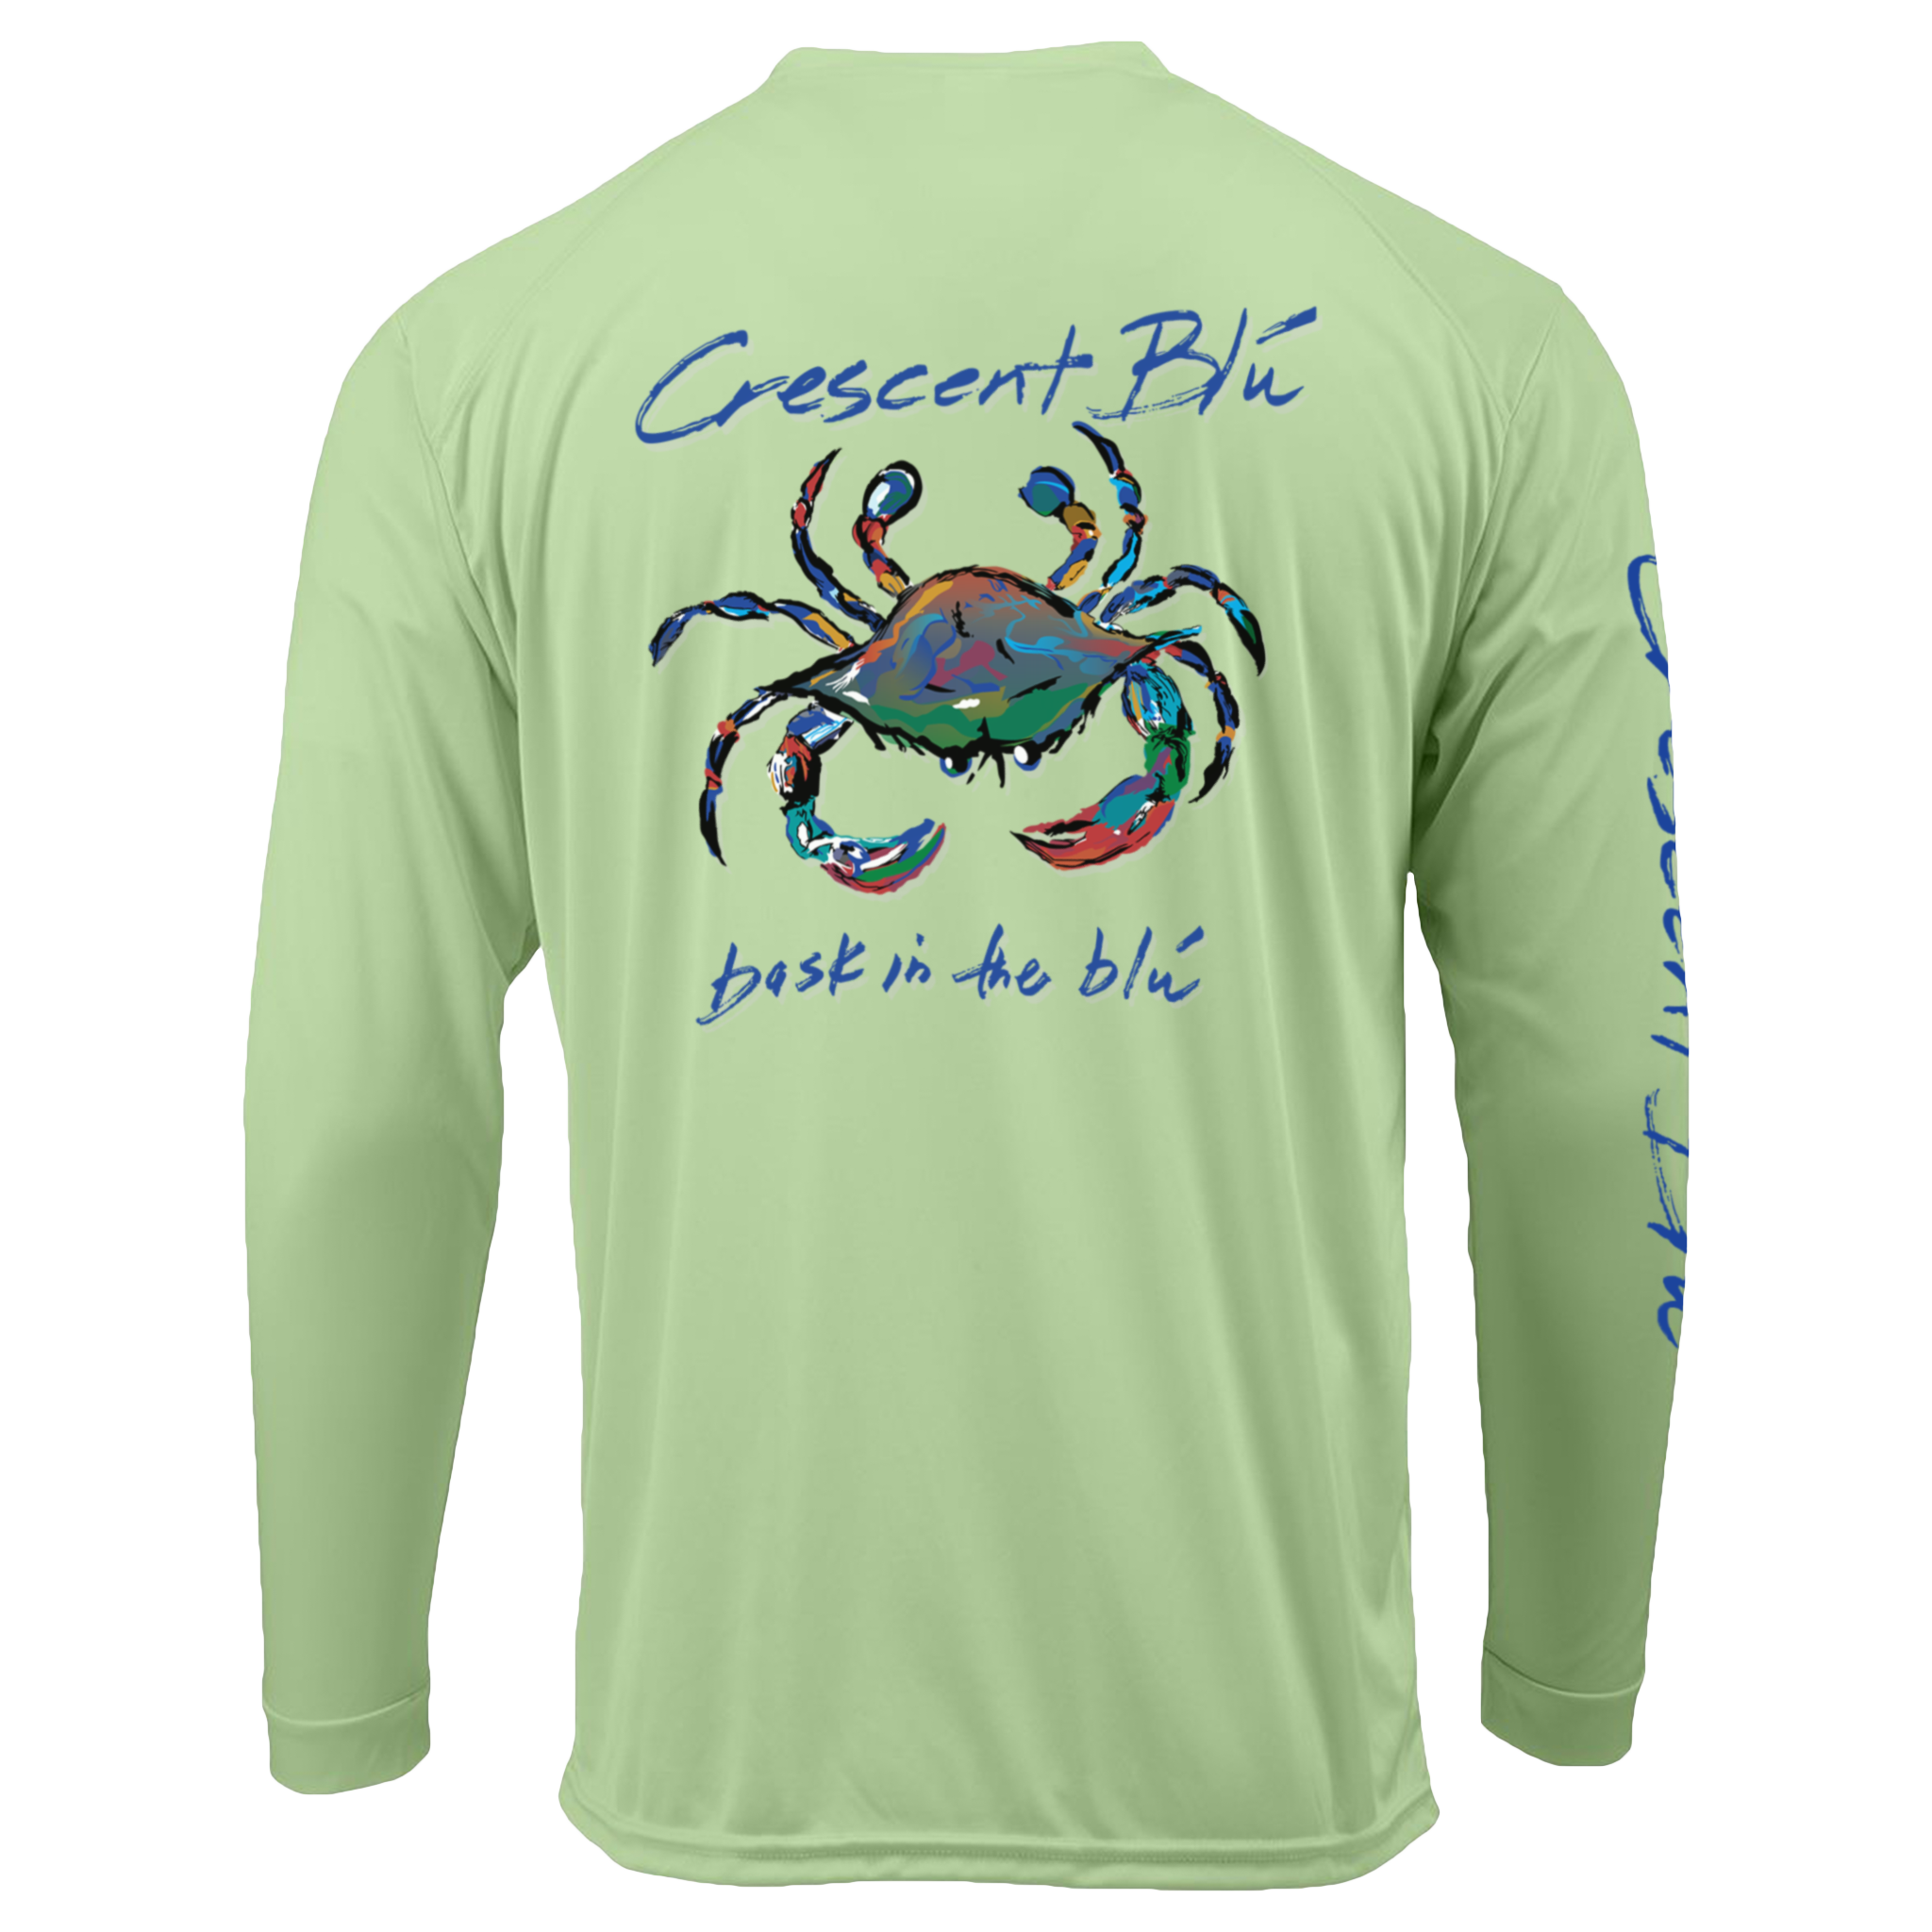 View of back of Limeade colored long sleeve Sun shirt. UPF 50+. Adult shirt. Crescent Blu, Bask in the Blu, and multi-colored crab logo printed on the back. 